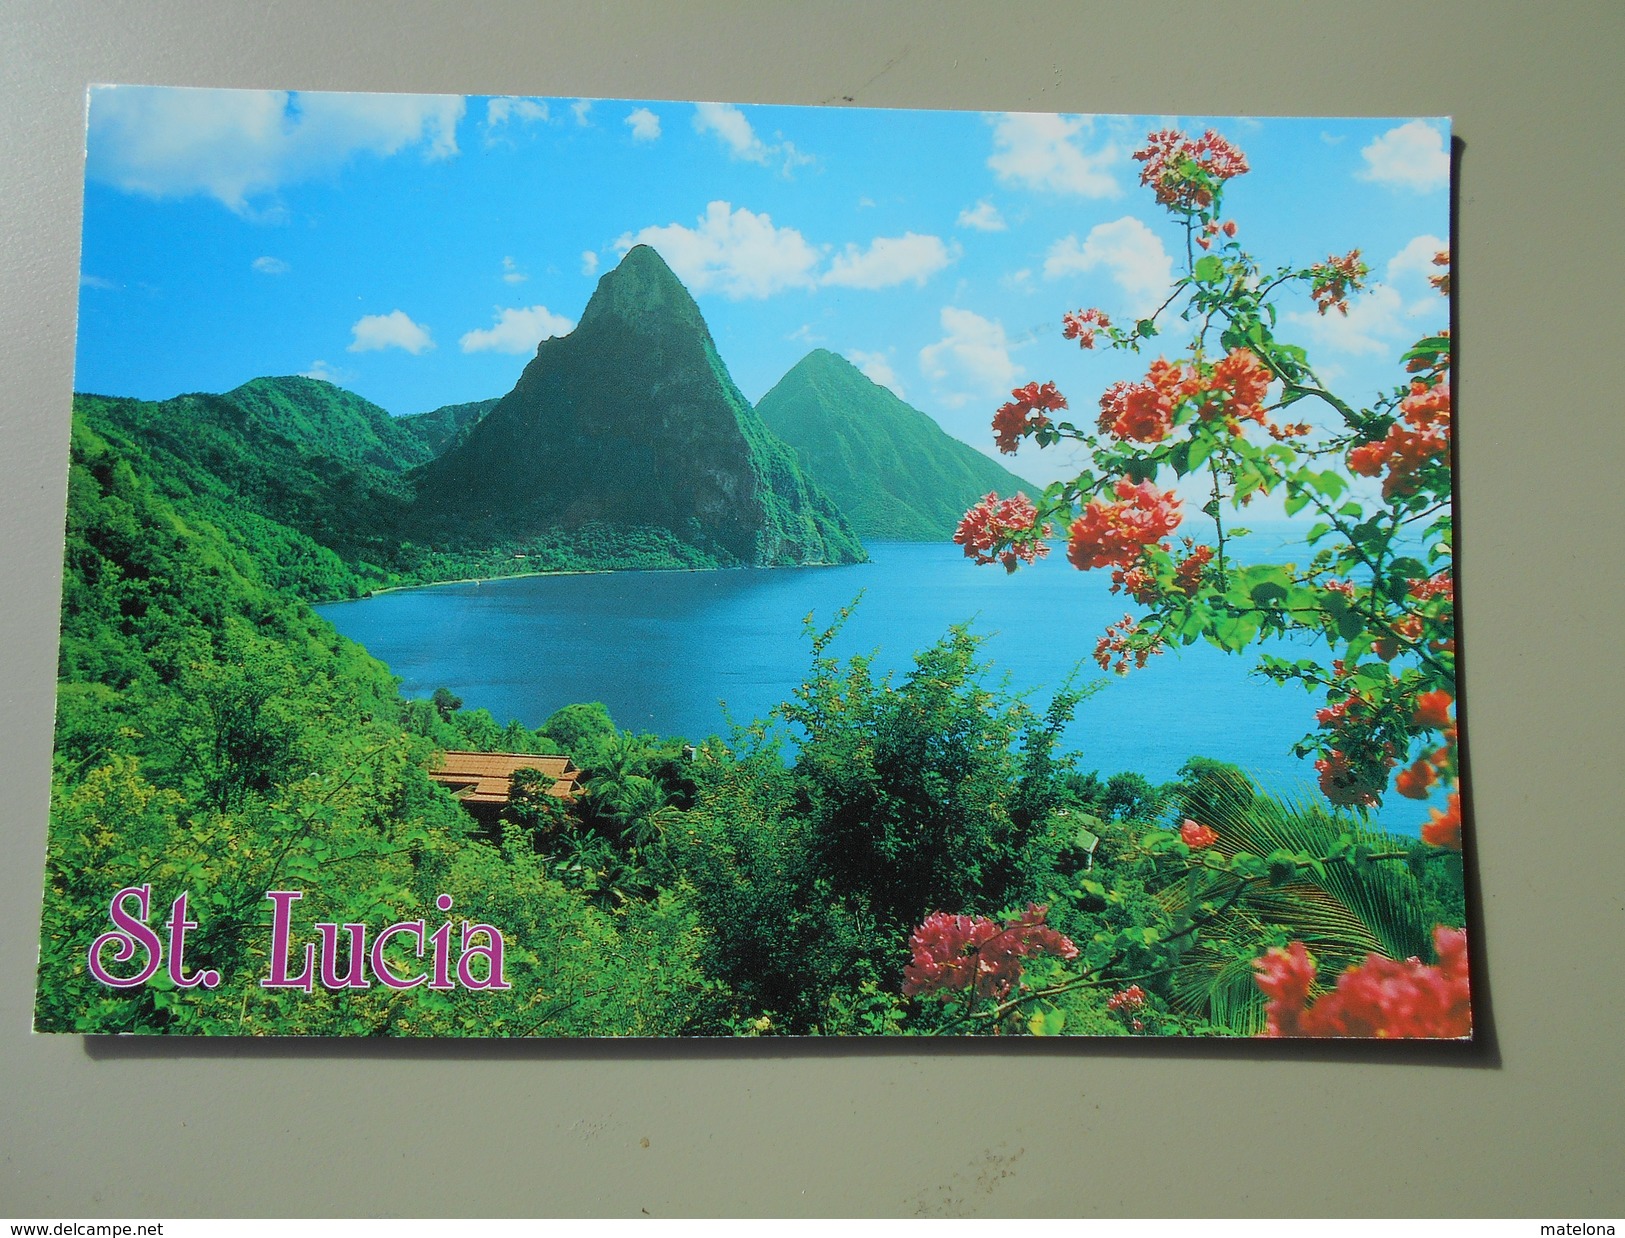 SAINTE LUCIE ST. LUCIA THE PITONS TWIN PEAKS RISING A HALF MILE OUT OF THE OCEAN.............. - Sainte-Lucie